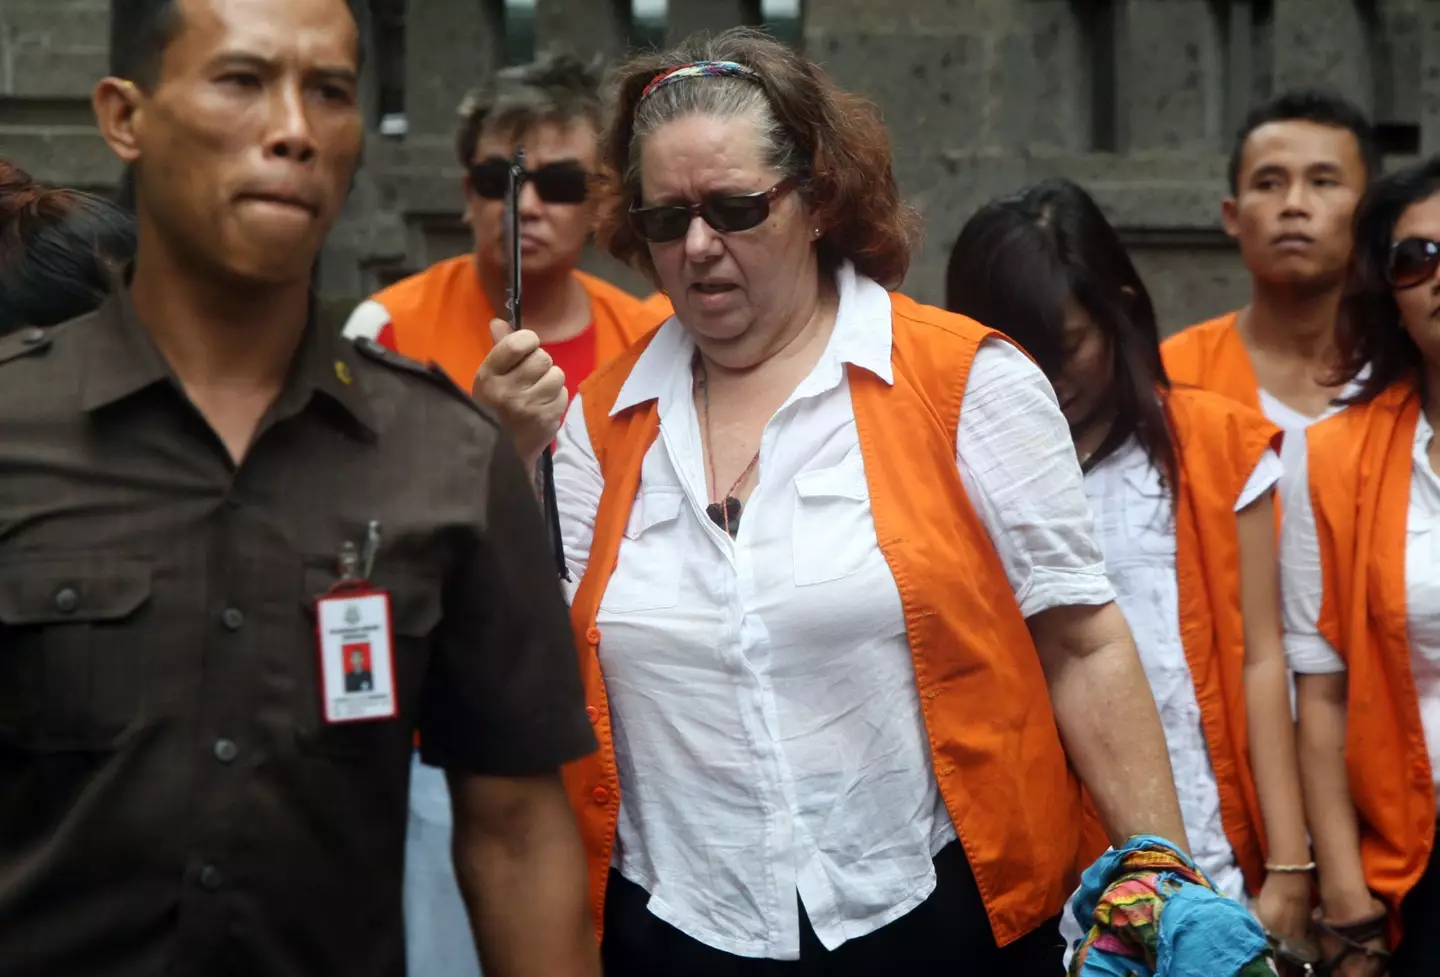 Lindsay Sandiford in 2013, the year she was sentenced to death in Indonesia.